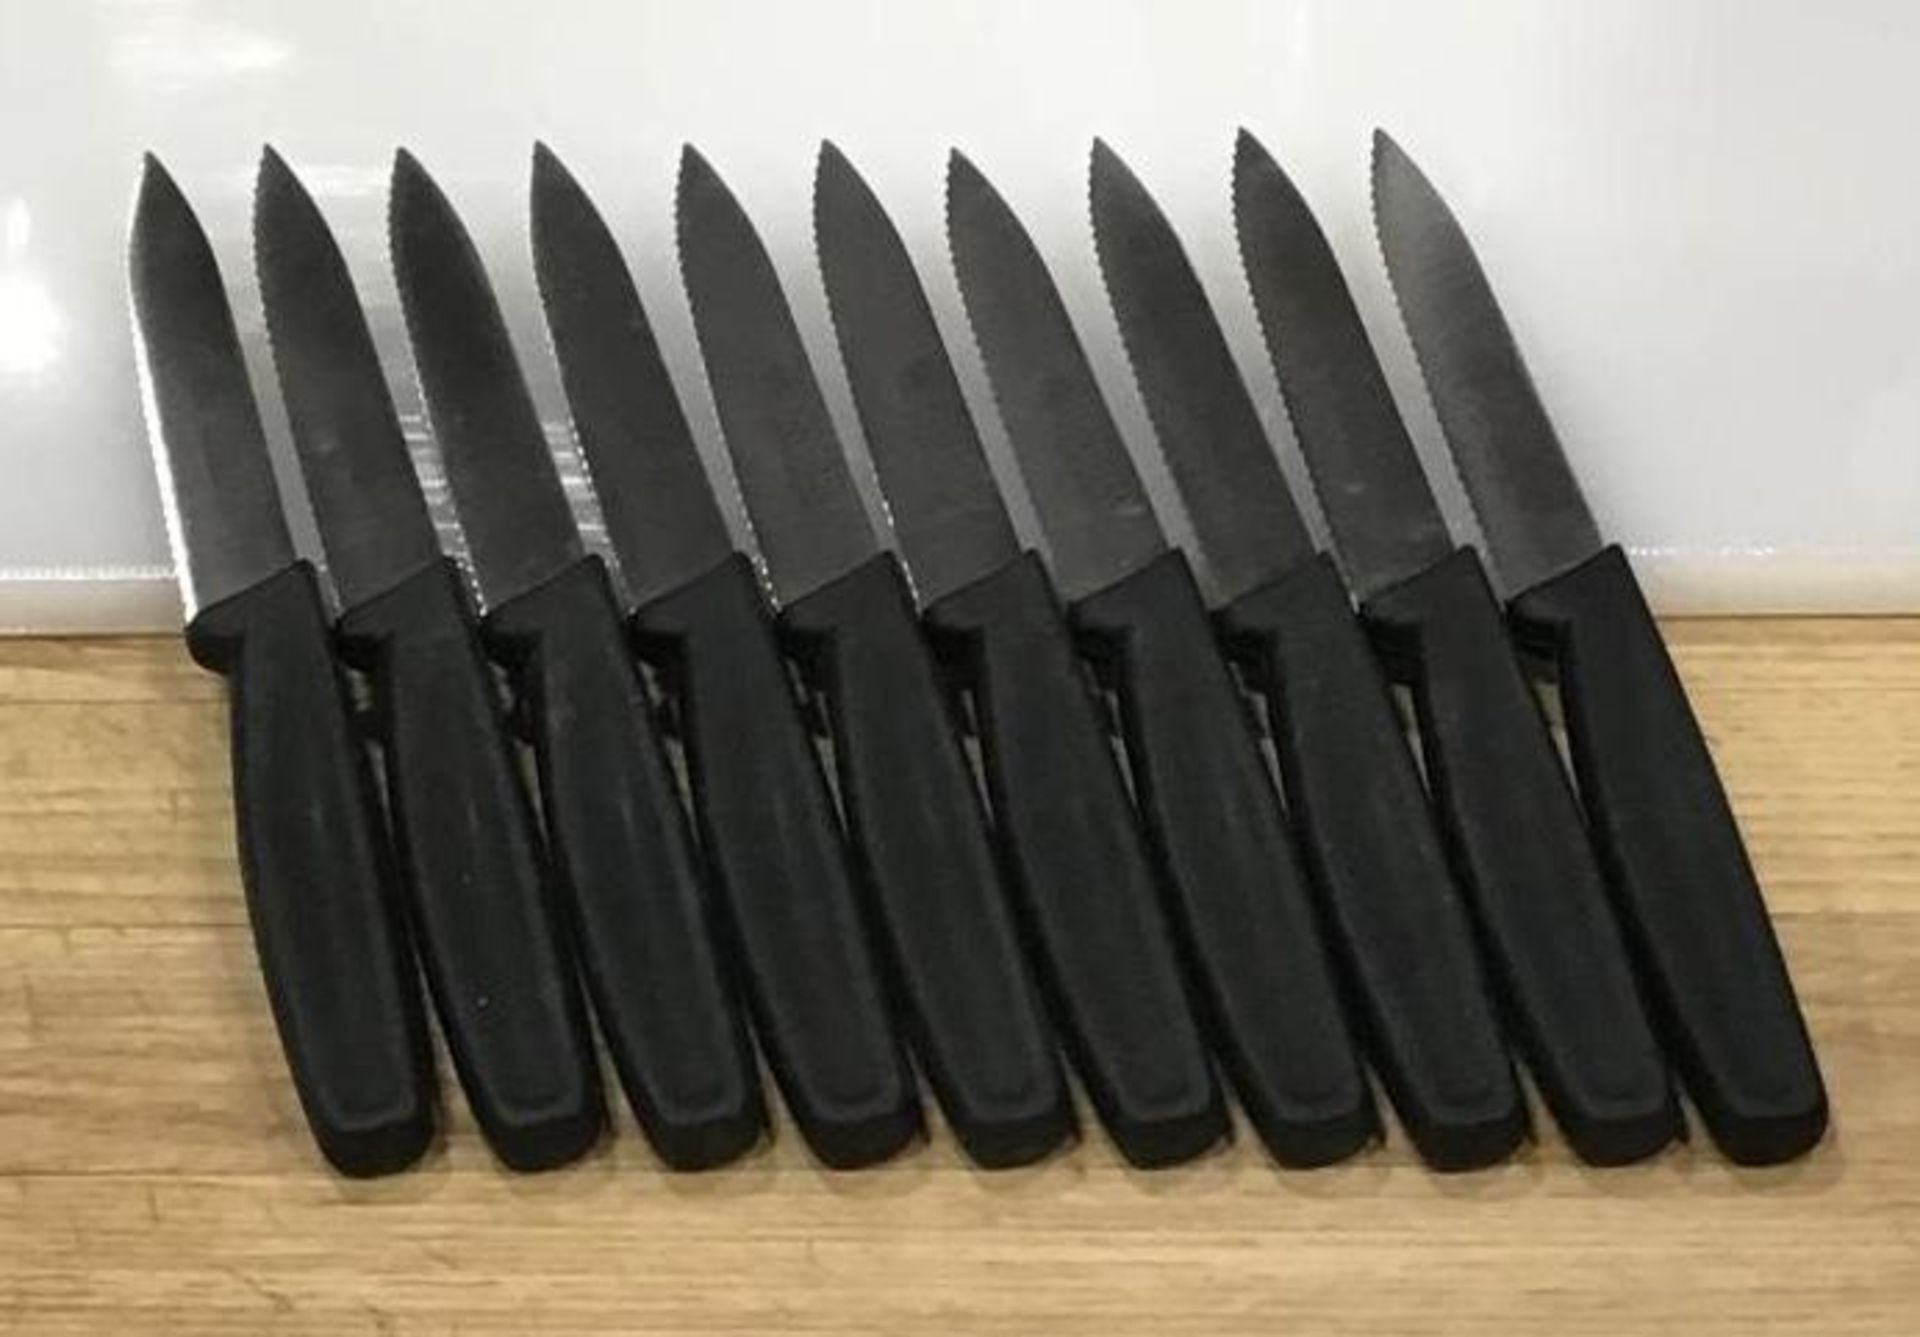 OMCAN 4" WAVE EDGE PARING KNIVES W/BLACK POLY HANDLE - LOT OF 10 - NEW - Image 2 of 3